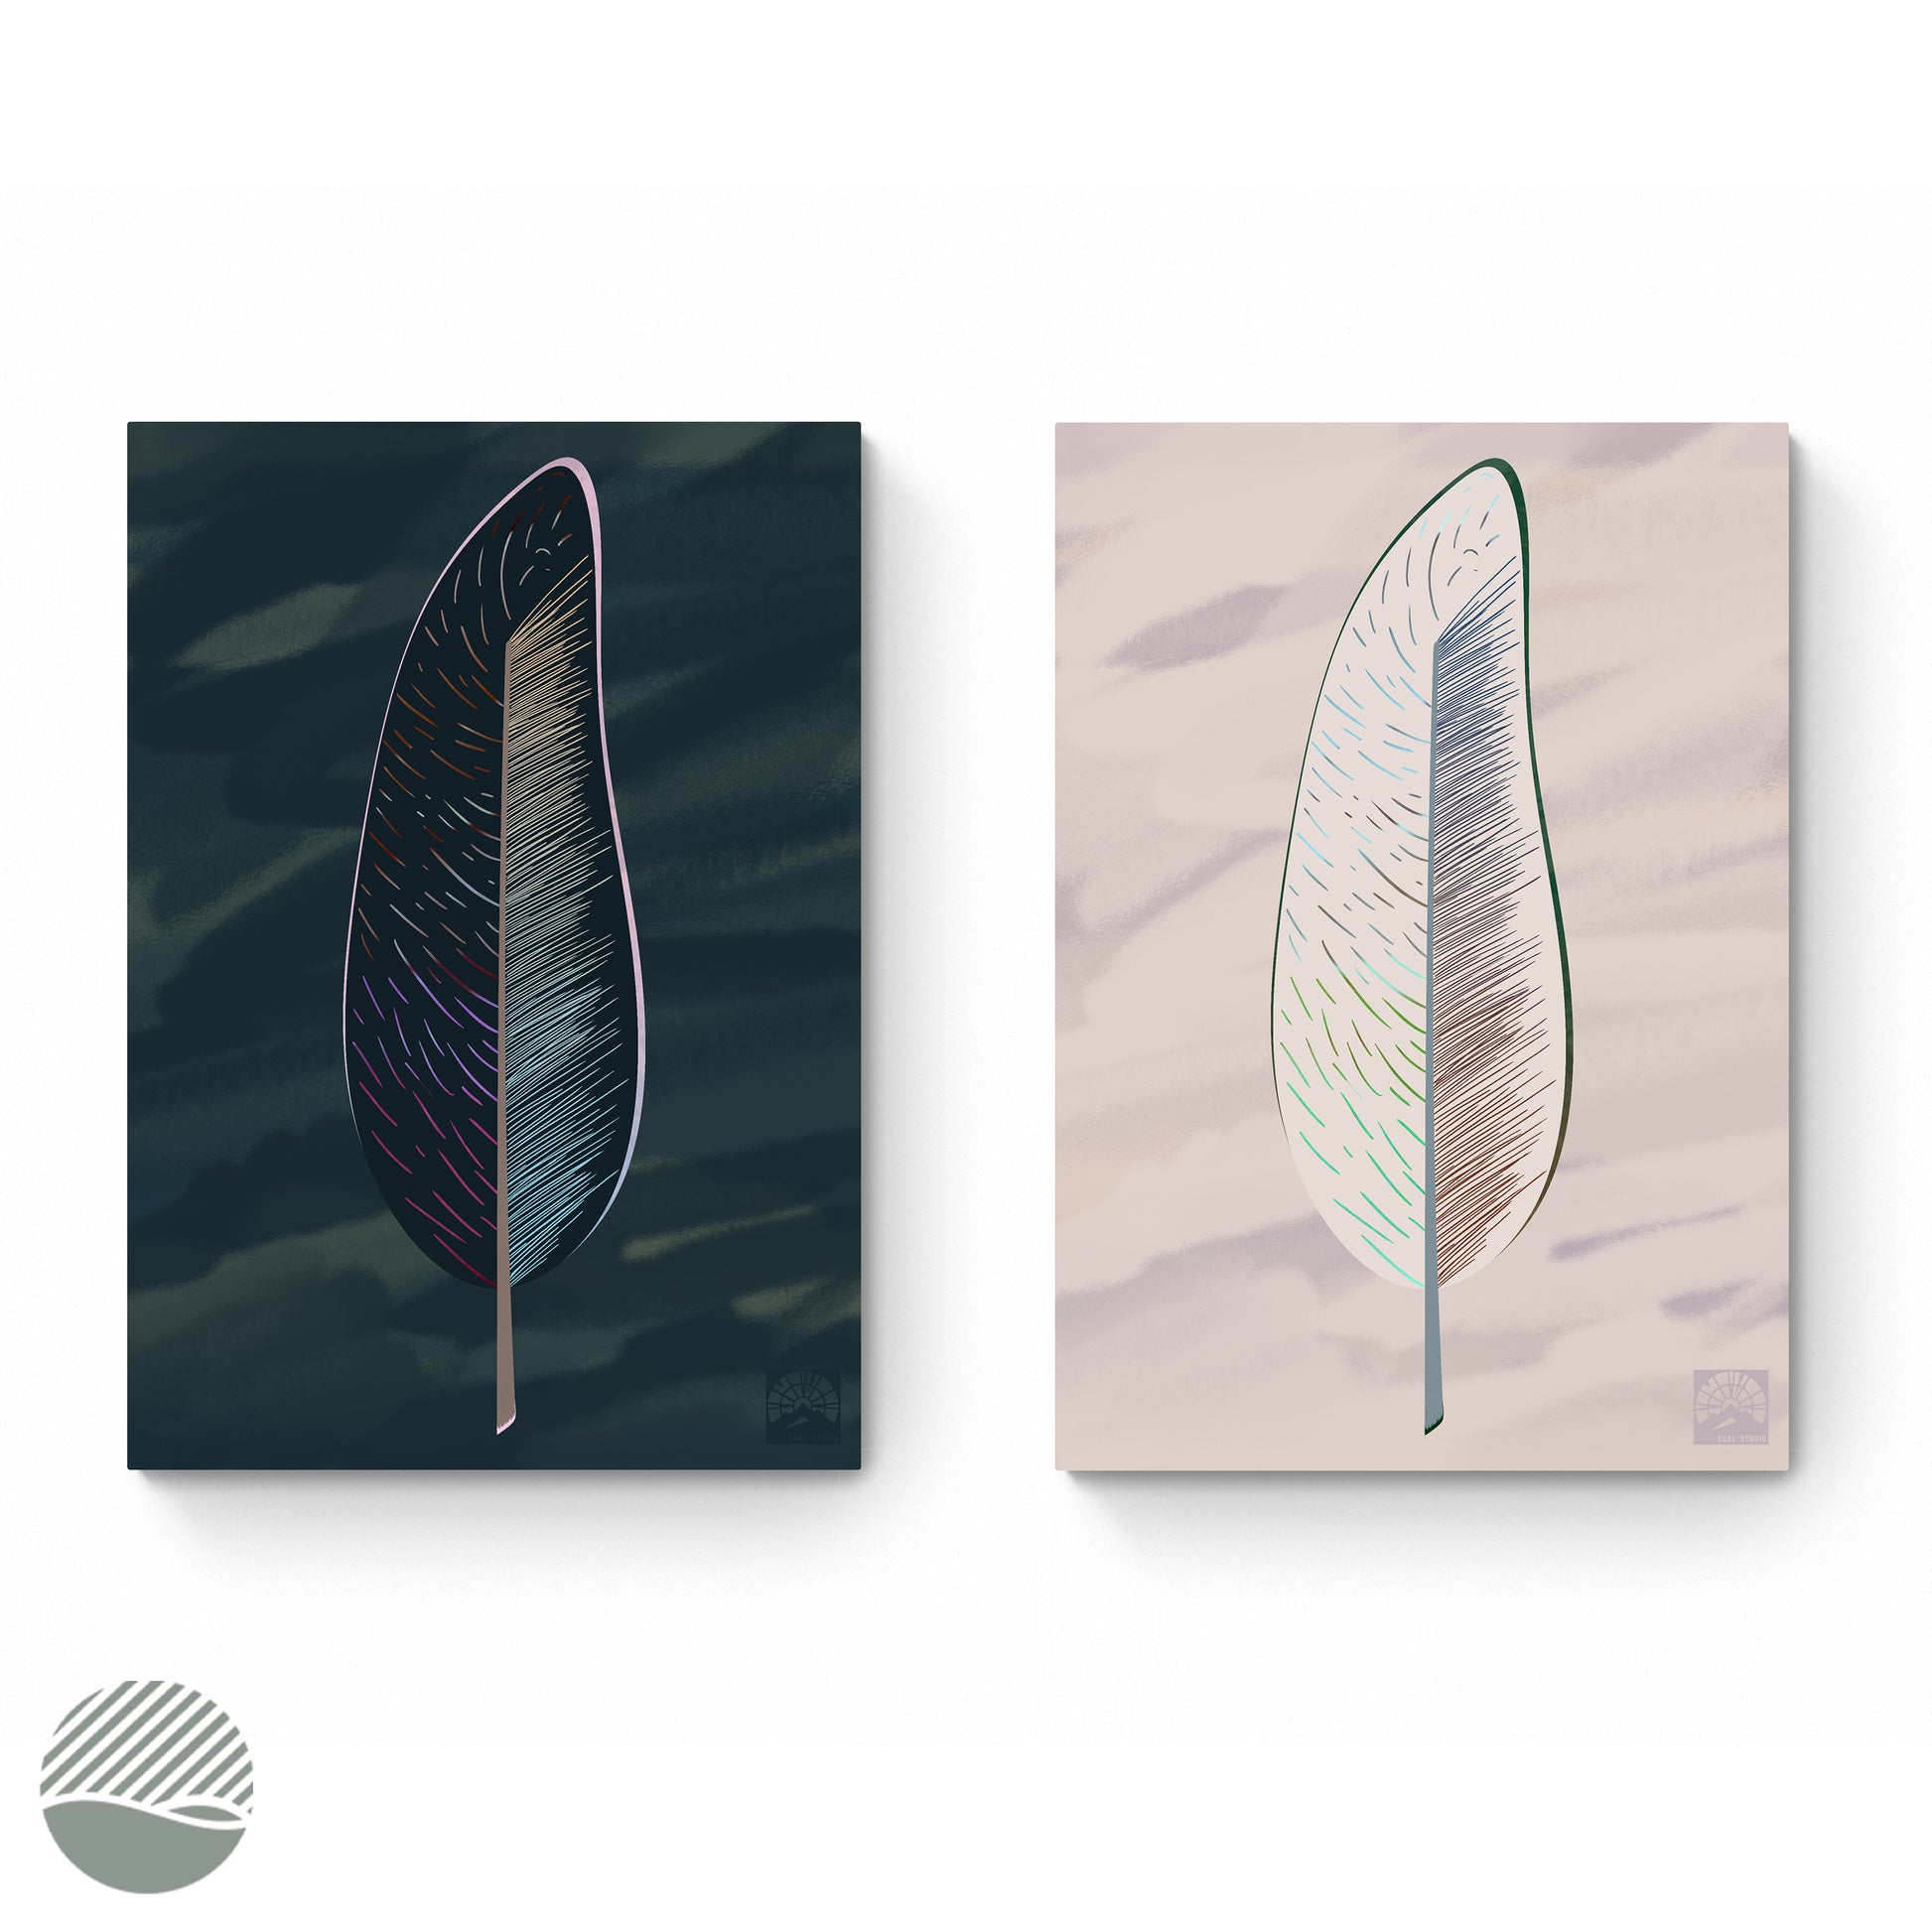 Unknown Feather in Dark and Light art print by SOAL Studio on NOKUKO.com 